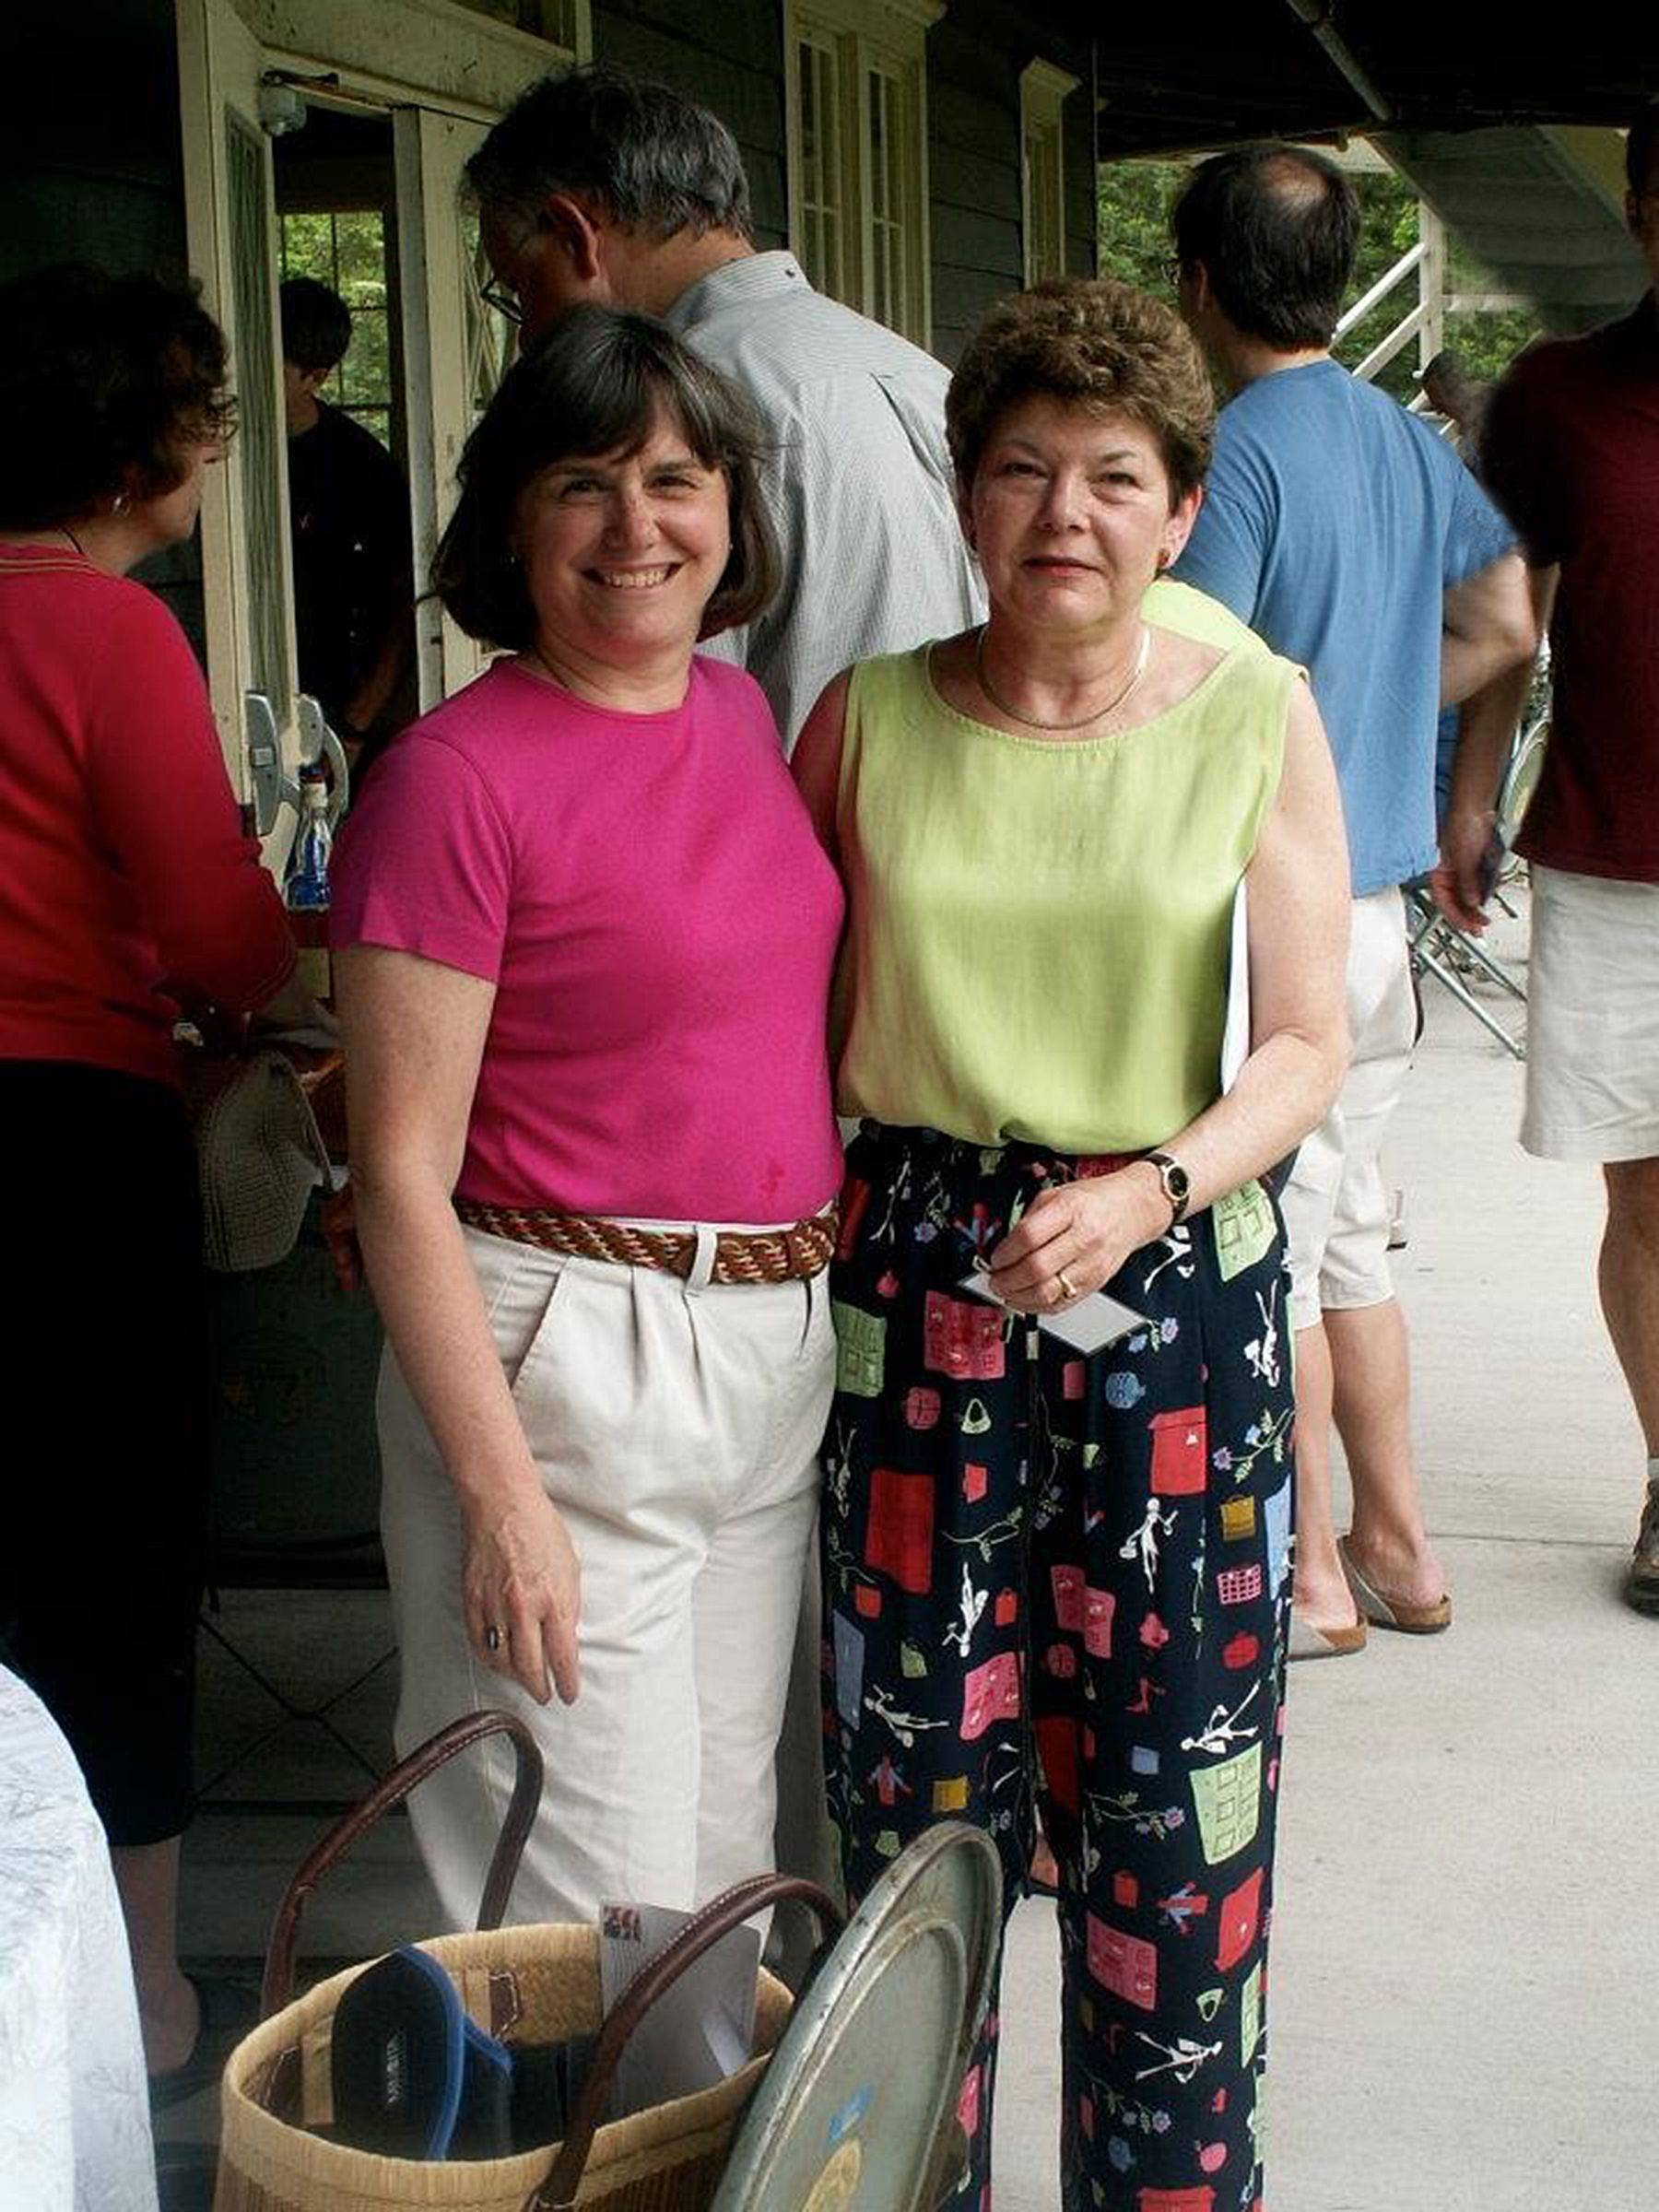  Catherine Bertini with her long time friend Gail Hill Gordon; they have been friends since Teen Age Republicans in 1966. 